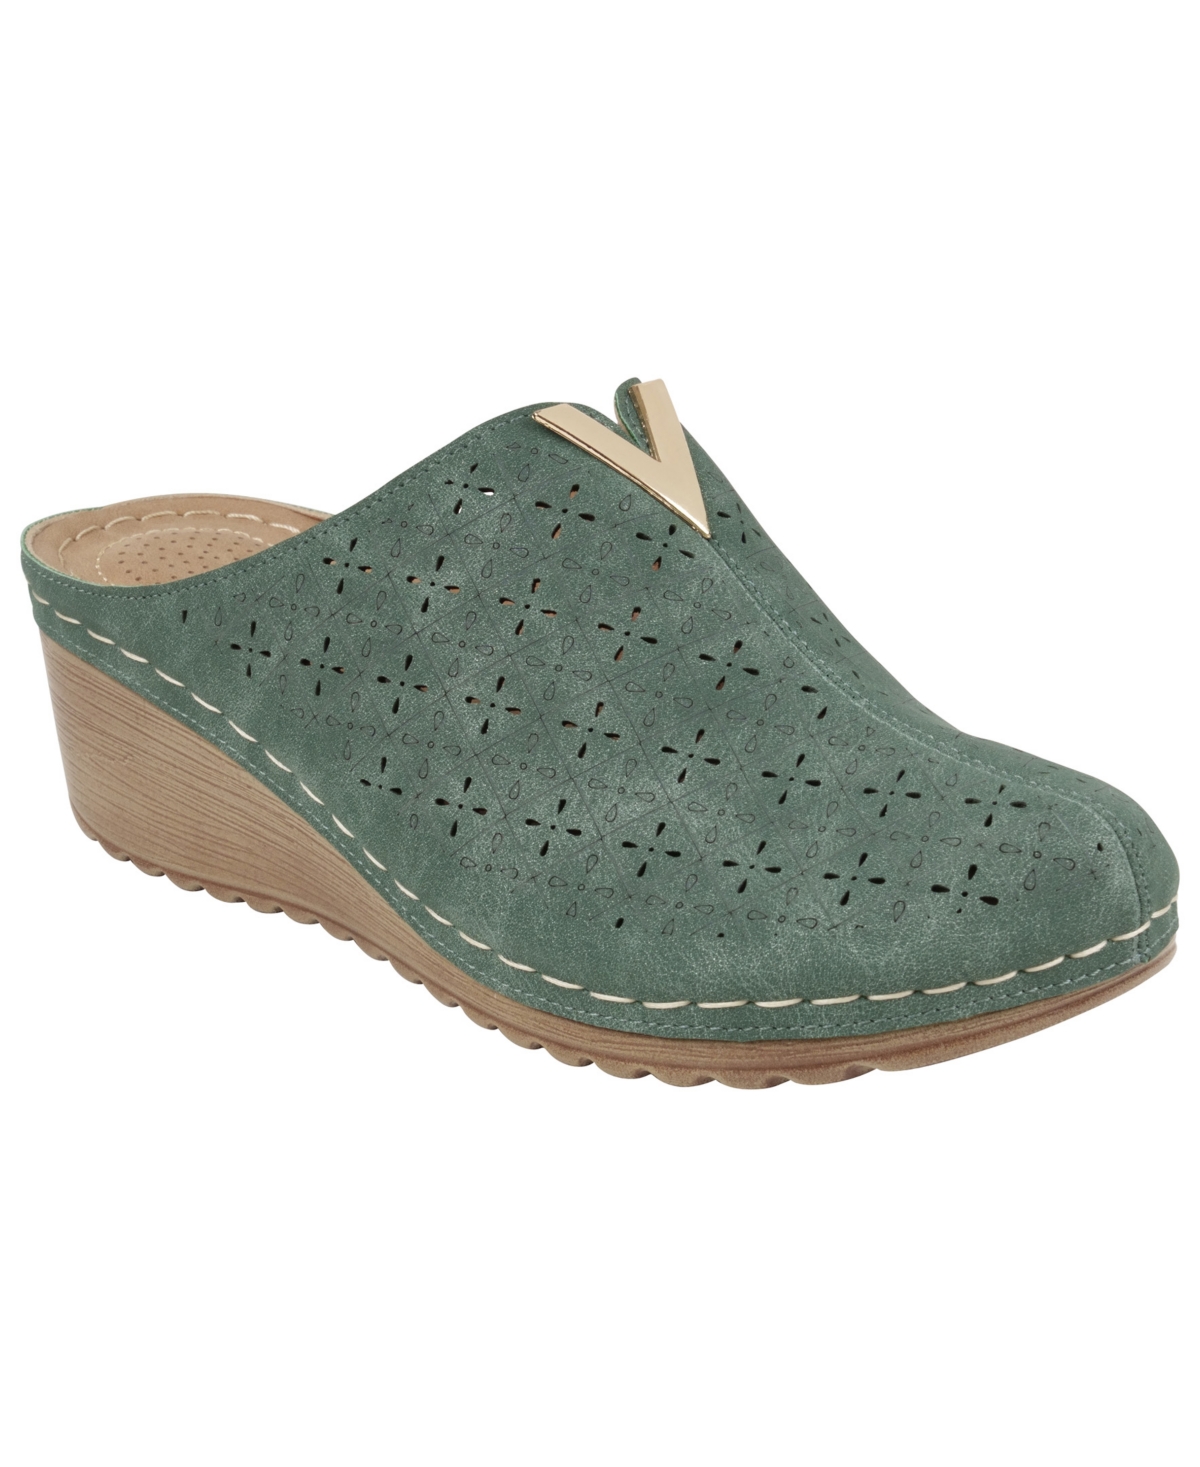 Women's Camille Slip-On Perforated Wedge Mules - Dark Teal